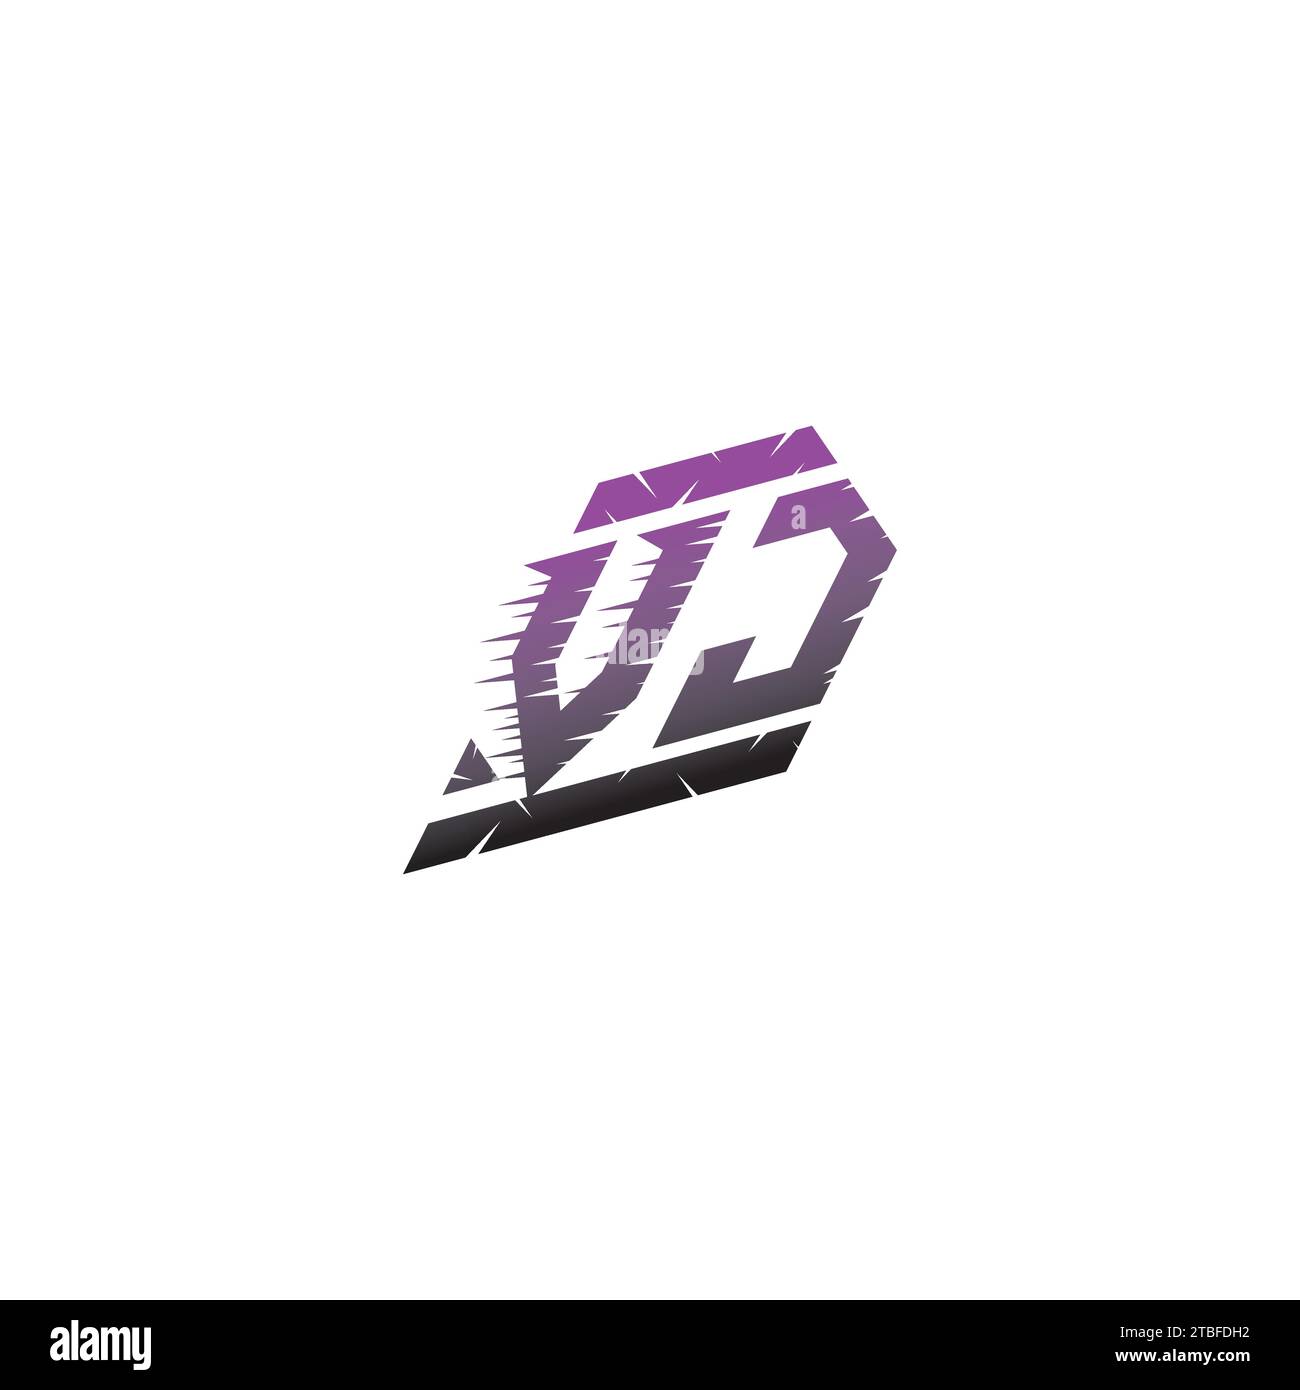 VJ initial esport logo inspiration ideas for gaming team, youtube, twitch Stock Vector